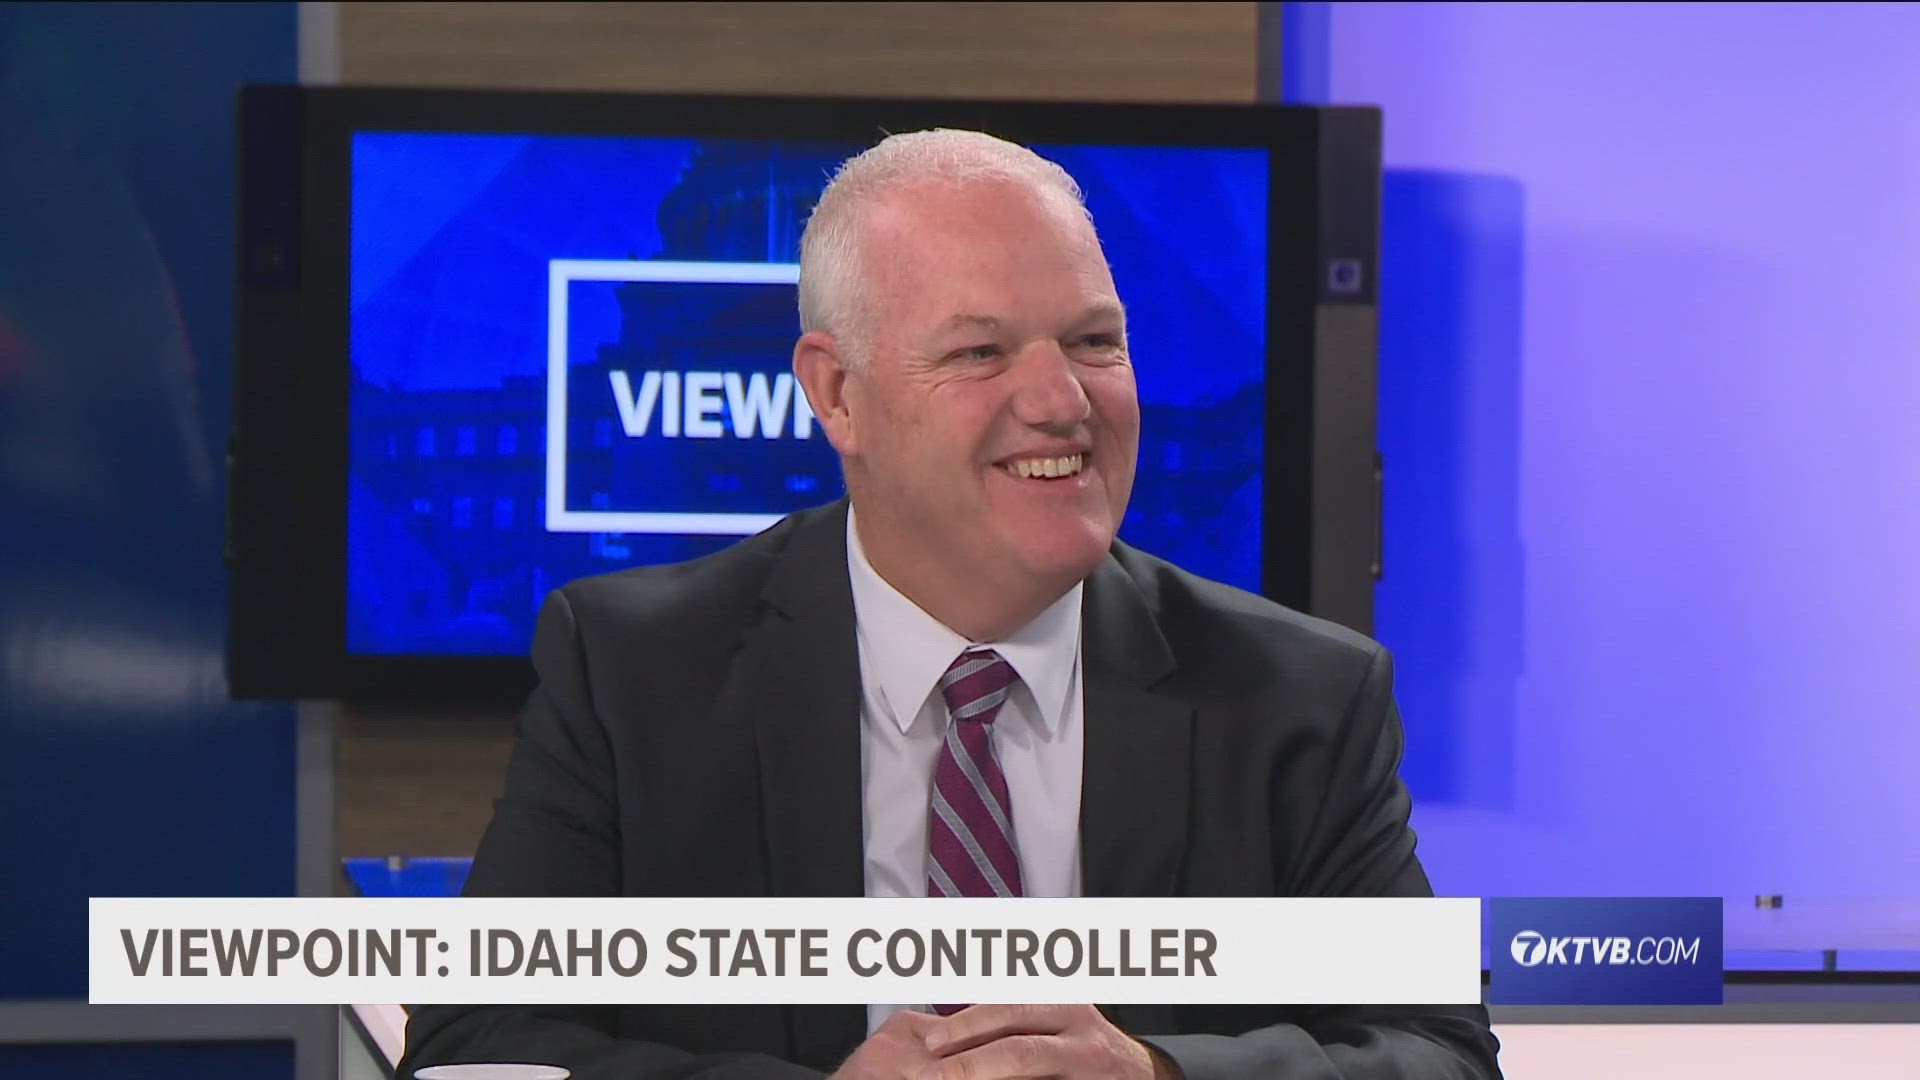 Get to know one of Idaho’s top elected officials while learning about behind the scenes work you may never have been aware of.